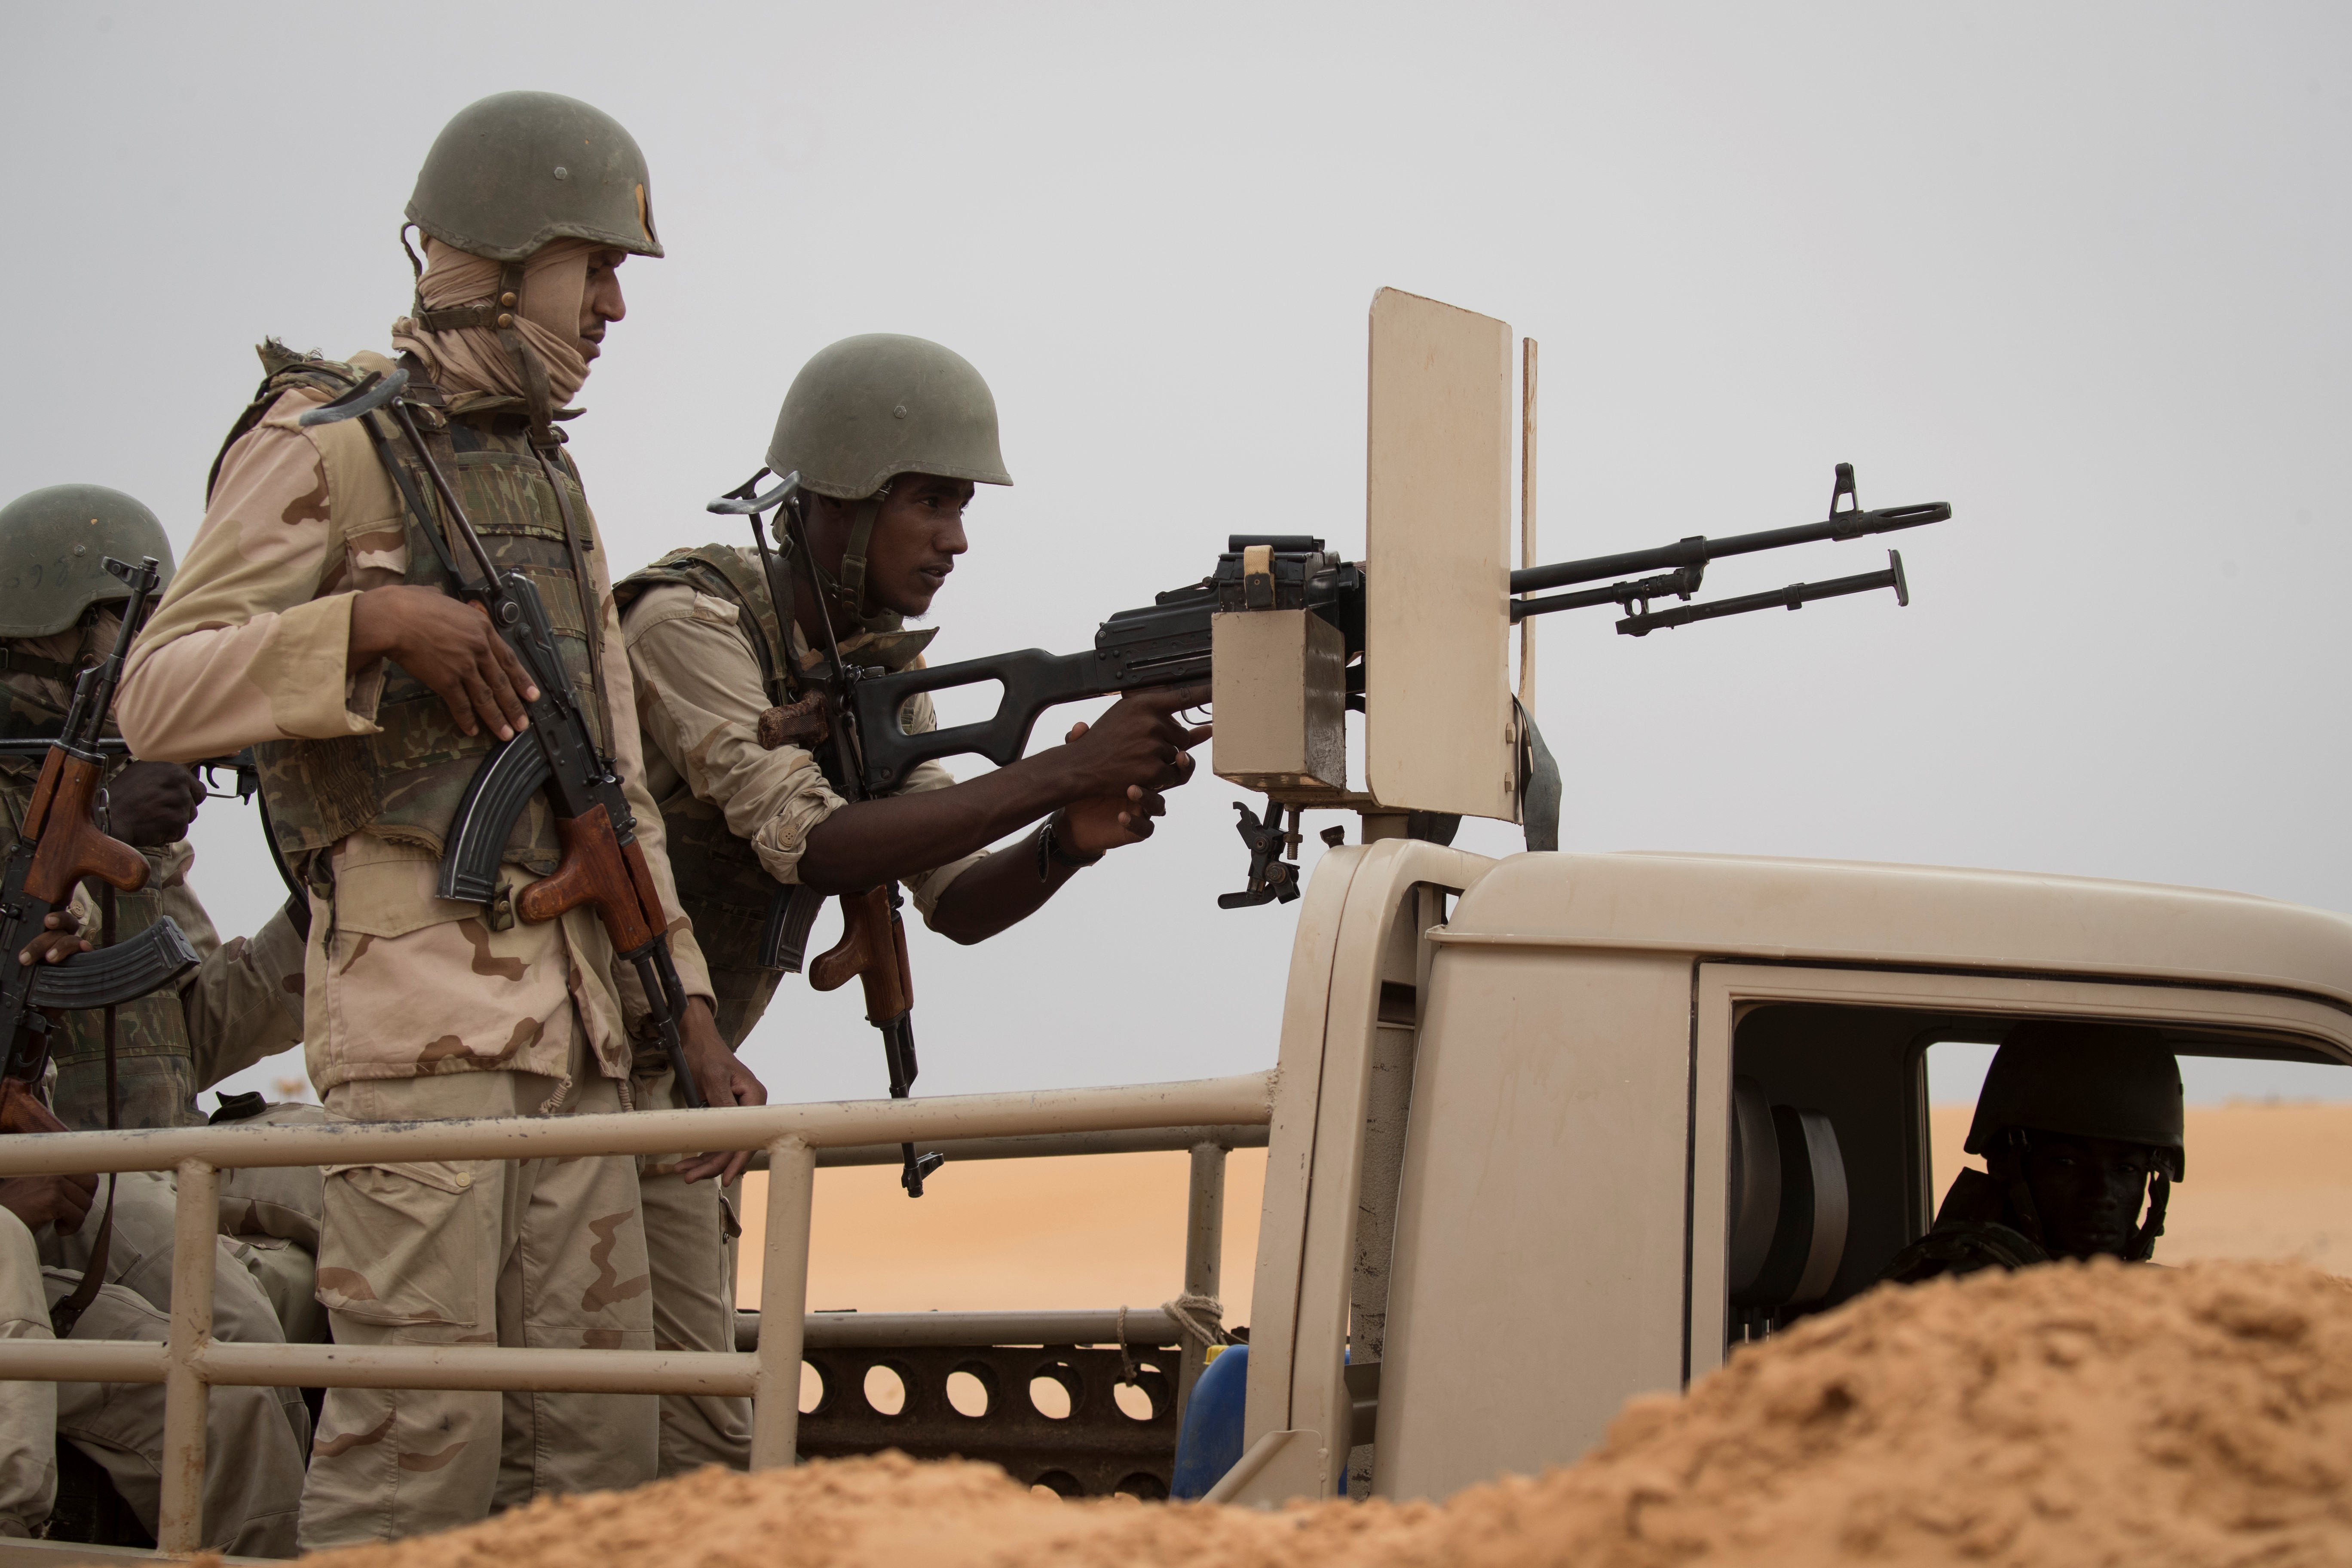 Photo above: Mauritanian soldiers stand guard at a G5 Sahel task force command post, on Nov. 22, 2018, in the southeast of Mauritania near the border with Mali. Photo by THOMAS SAMSON/AFP via Getty Images.